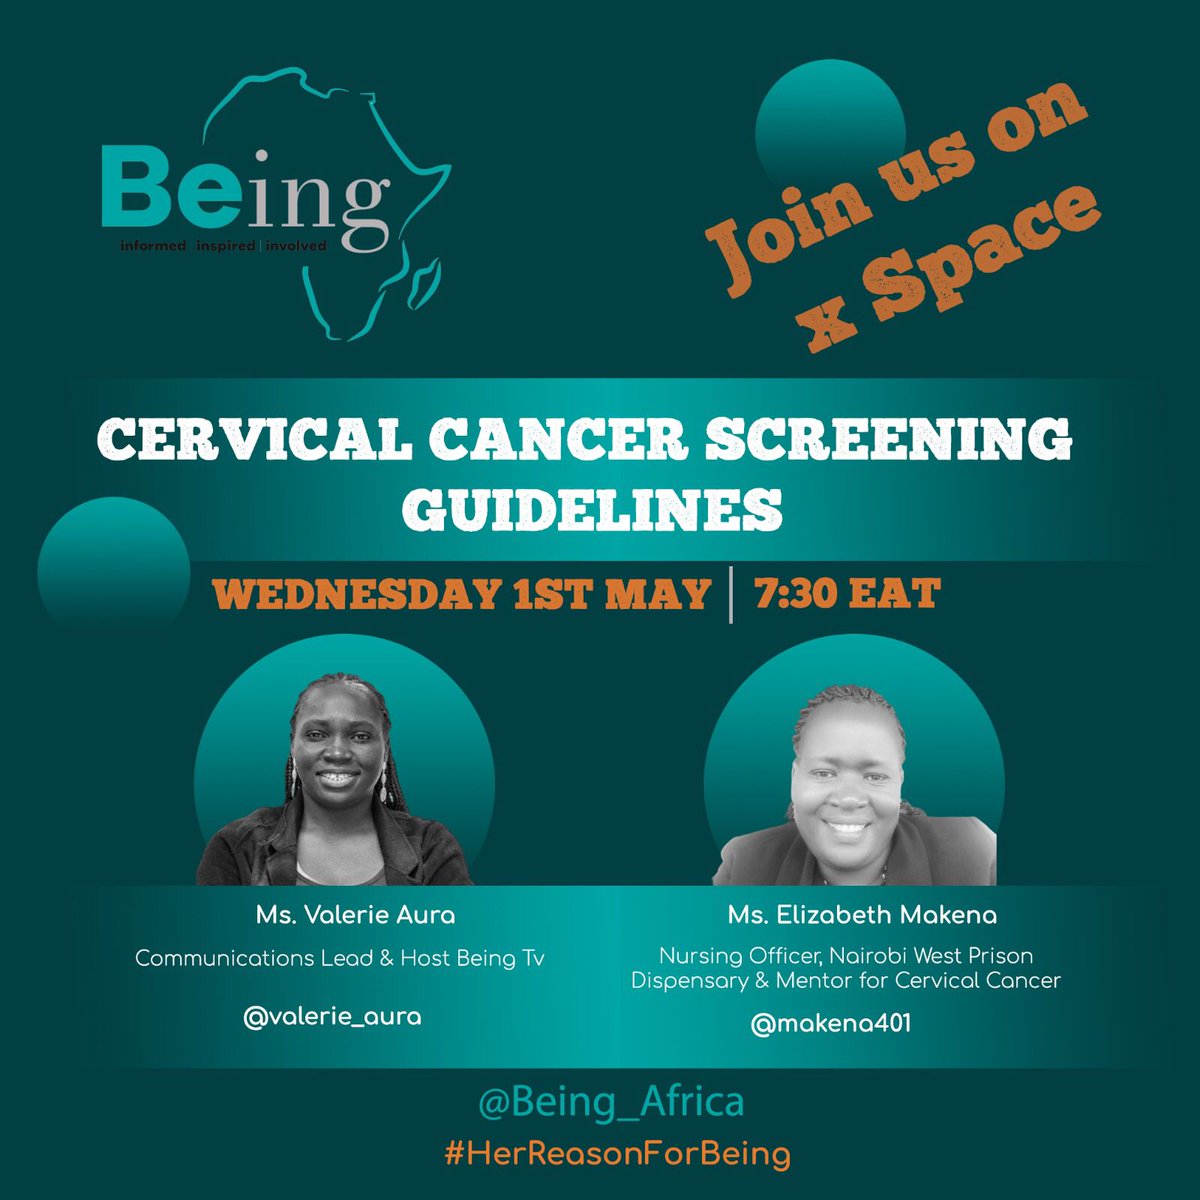 Are you up to date on Cervical Cancer screening guidelines? Join our X Space tonight at 7:30 pm EAT to stay informed and empowered in the fight against #cervicalcancer. 
#HerReasonForBeing
#CervicalCancerAwareness #PreventionIsKey

Link: twitter.com/i/spaces/1jMJg…